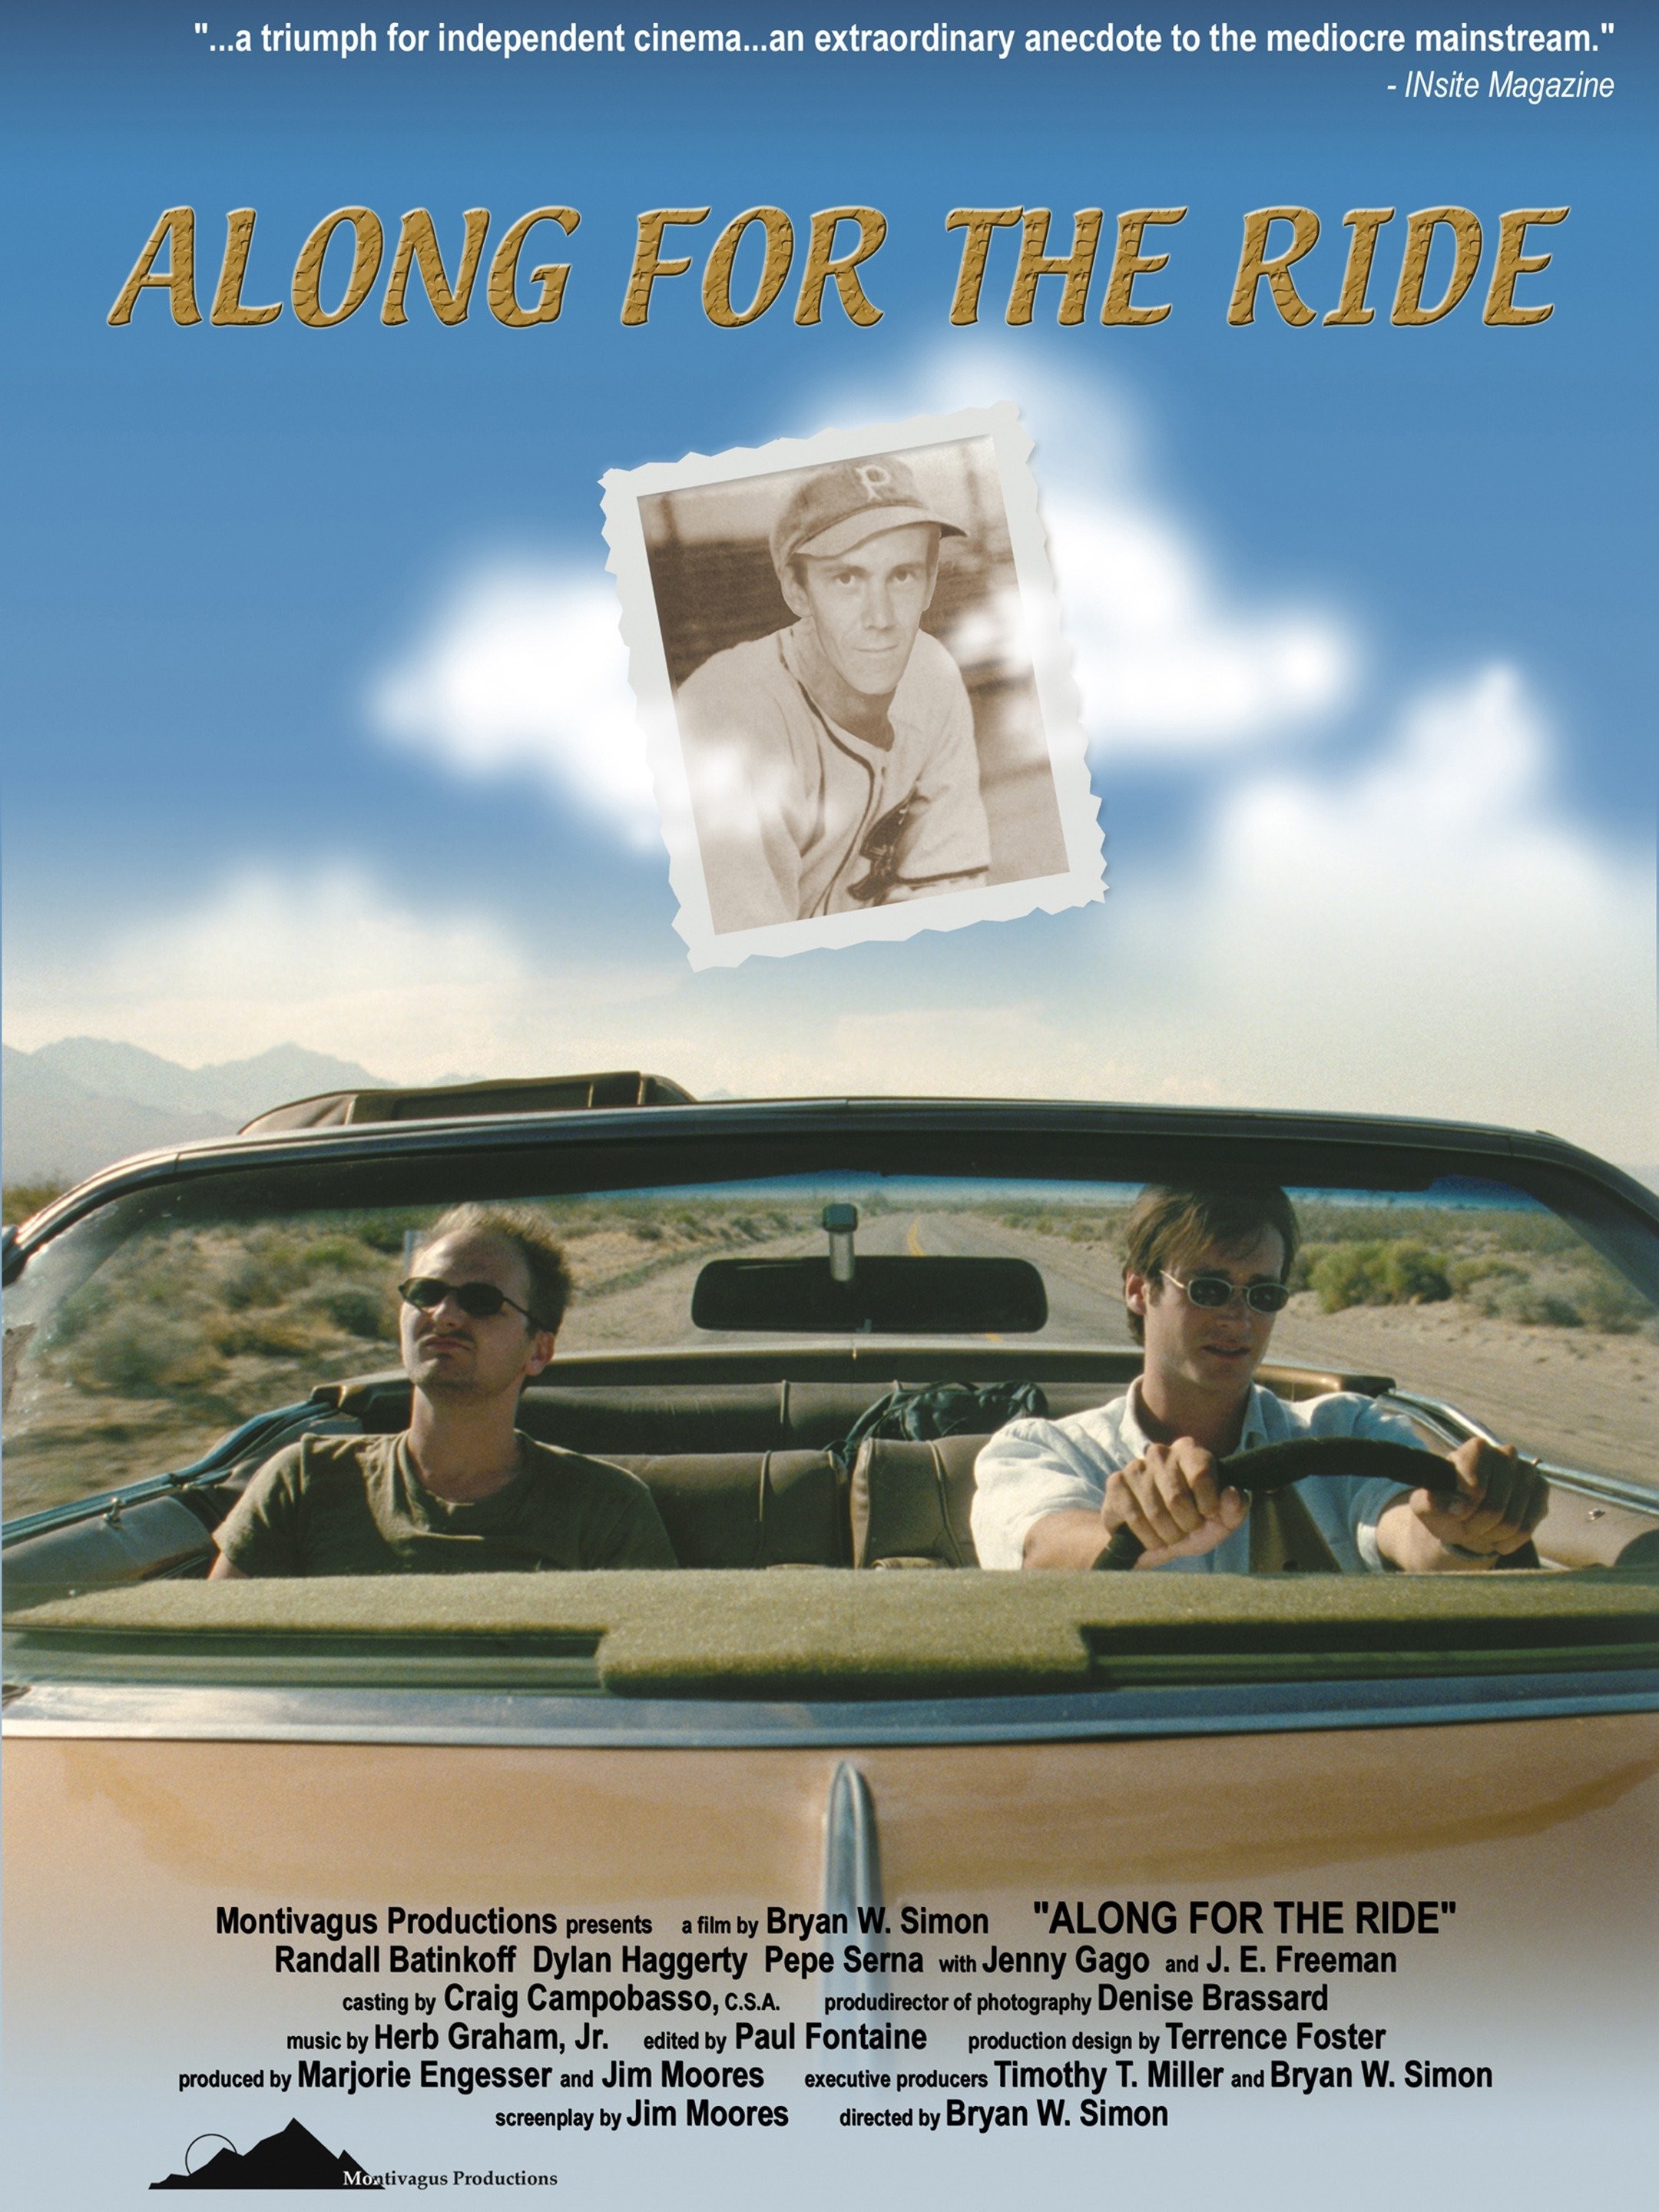 Along for the Ride (film) - Wikipedia